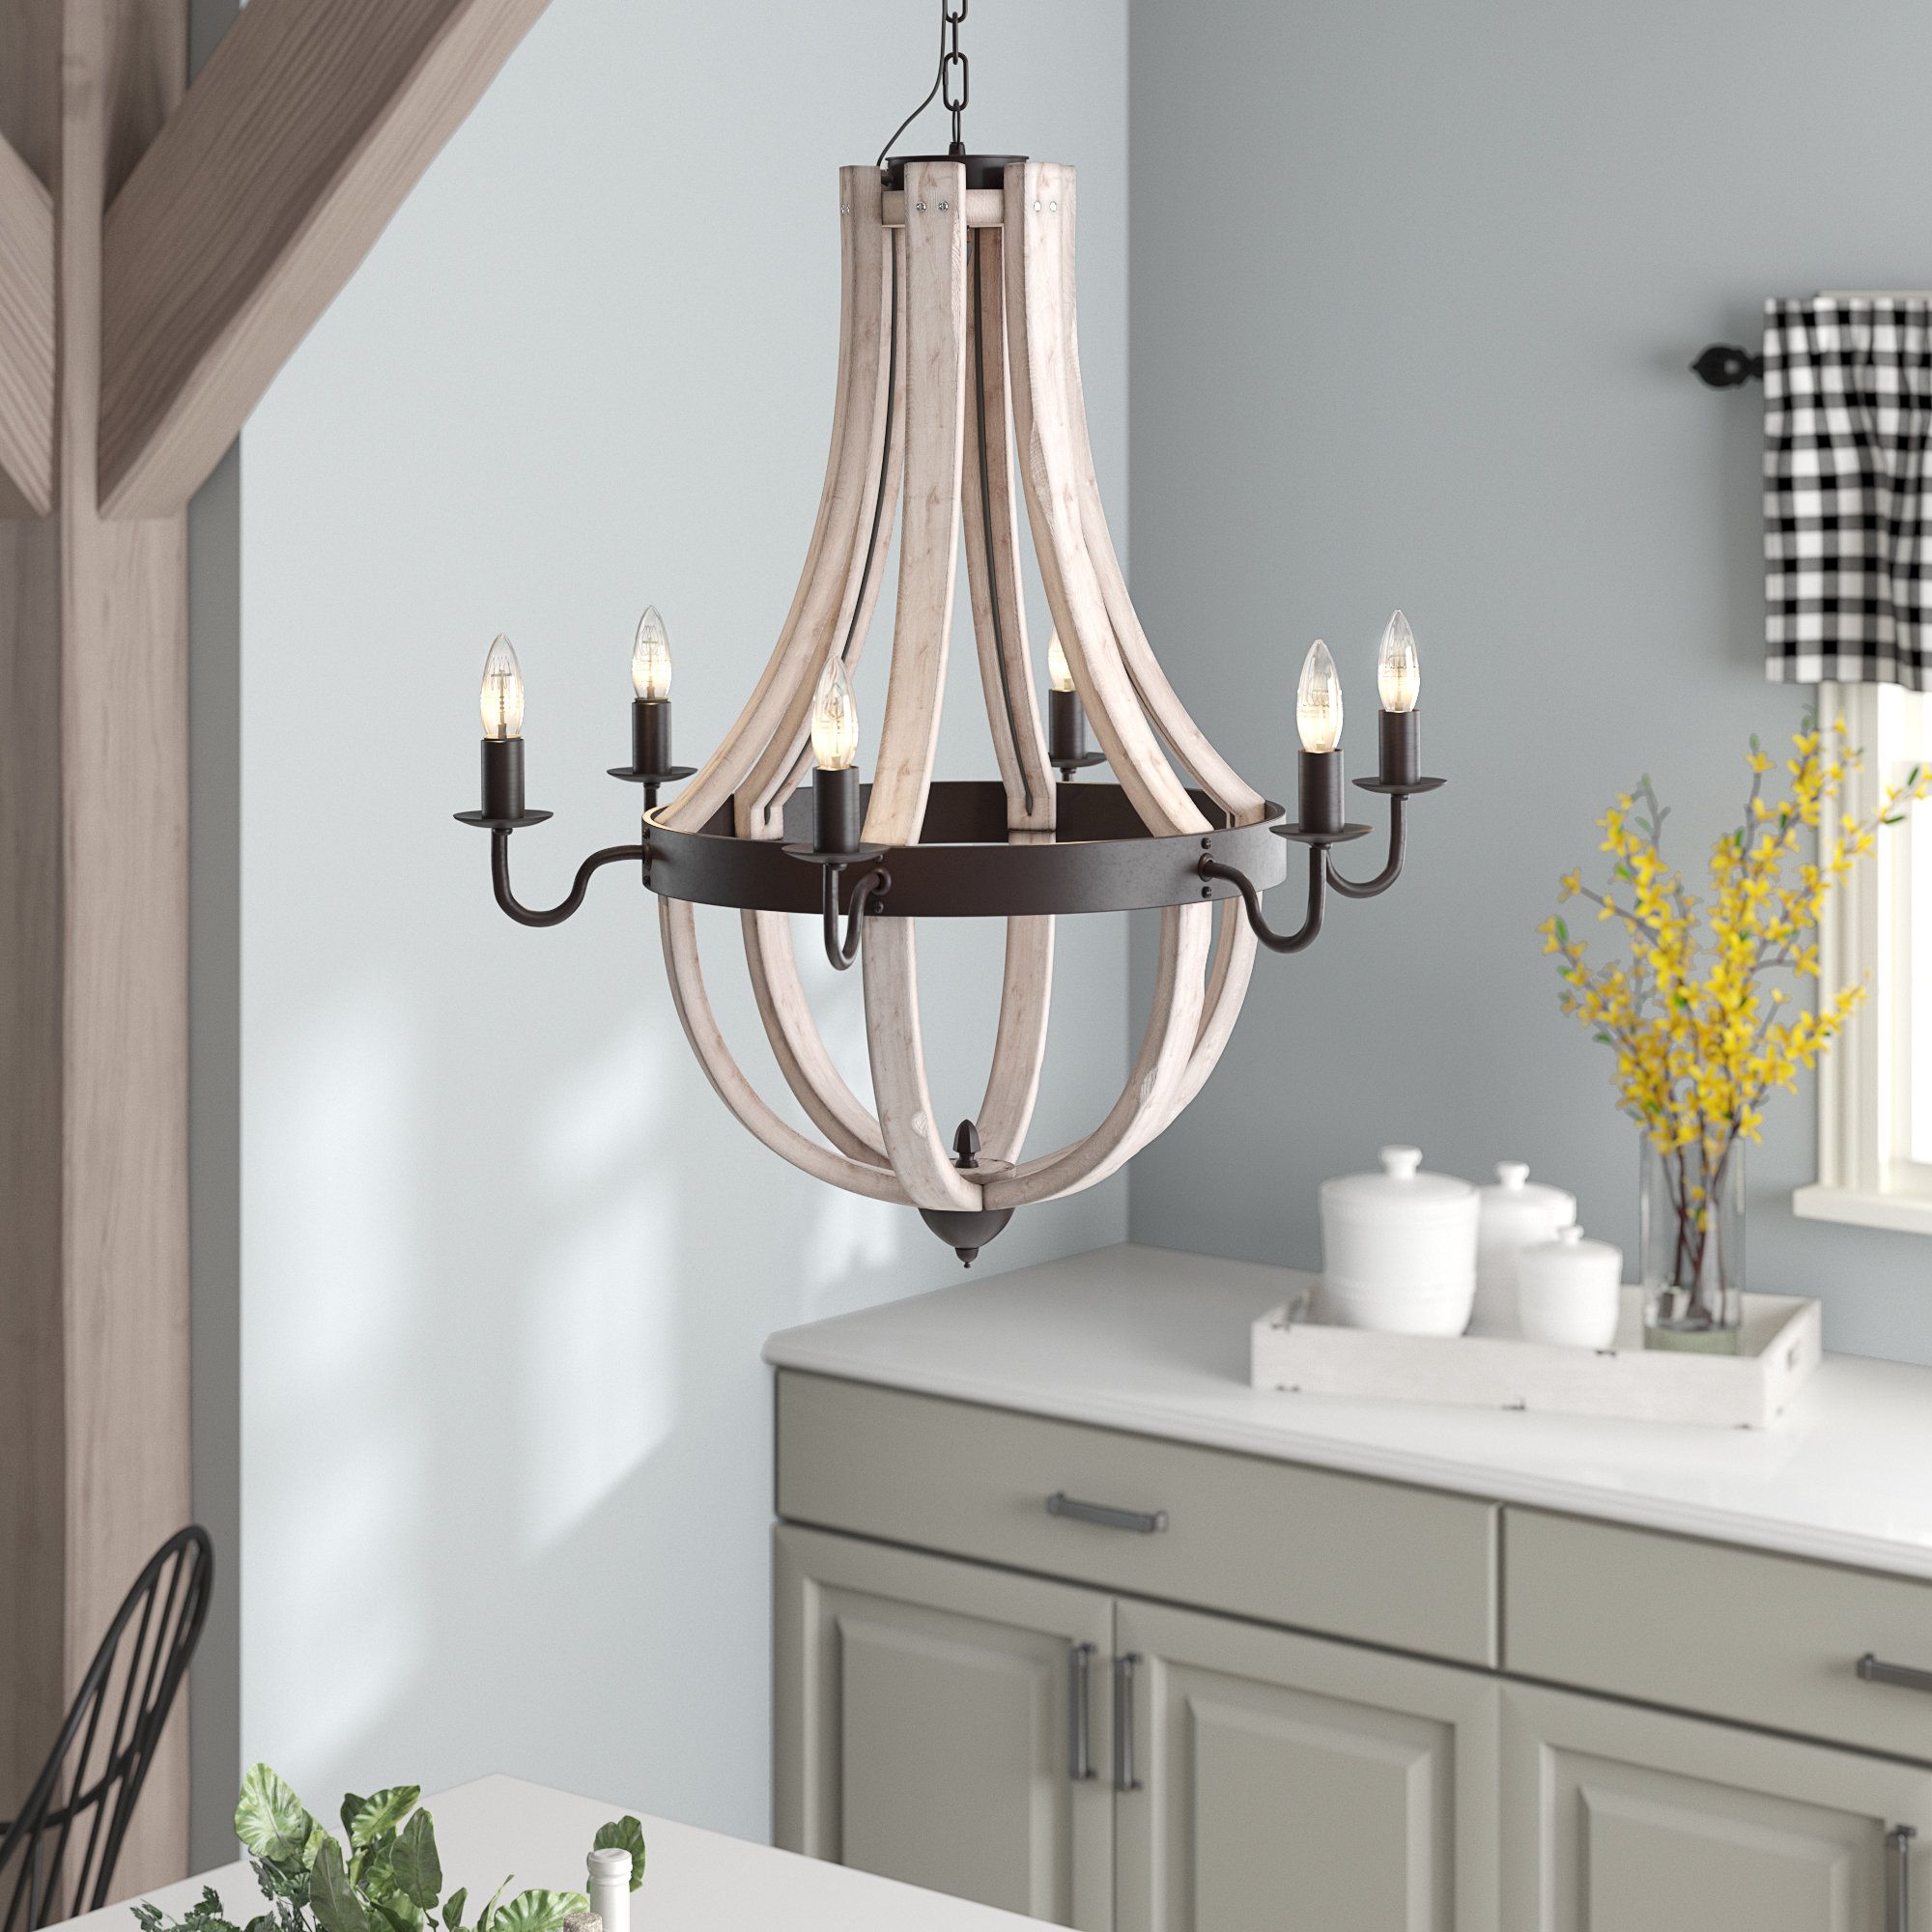 Shabby Chic Chandeliers | Wayfair Within Lynn 6 Light Geometric Chandeliers (View 18 of 30)